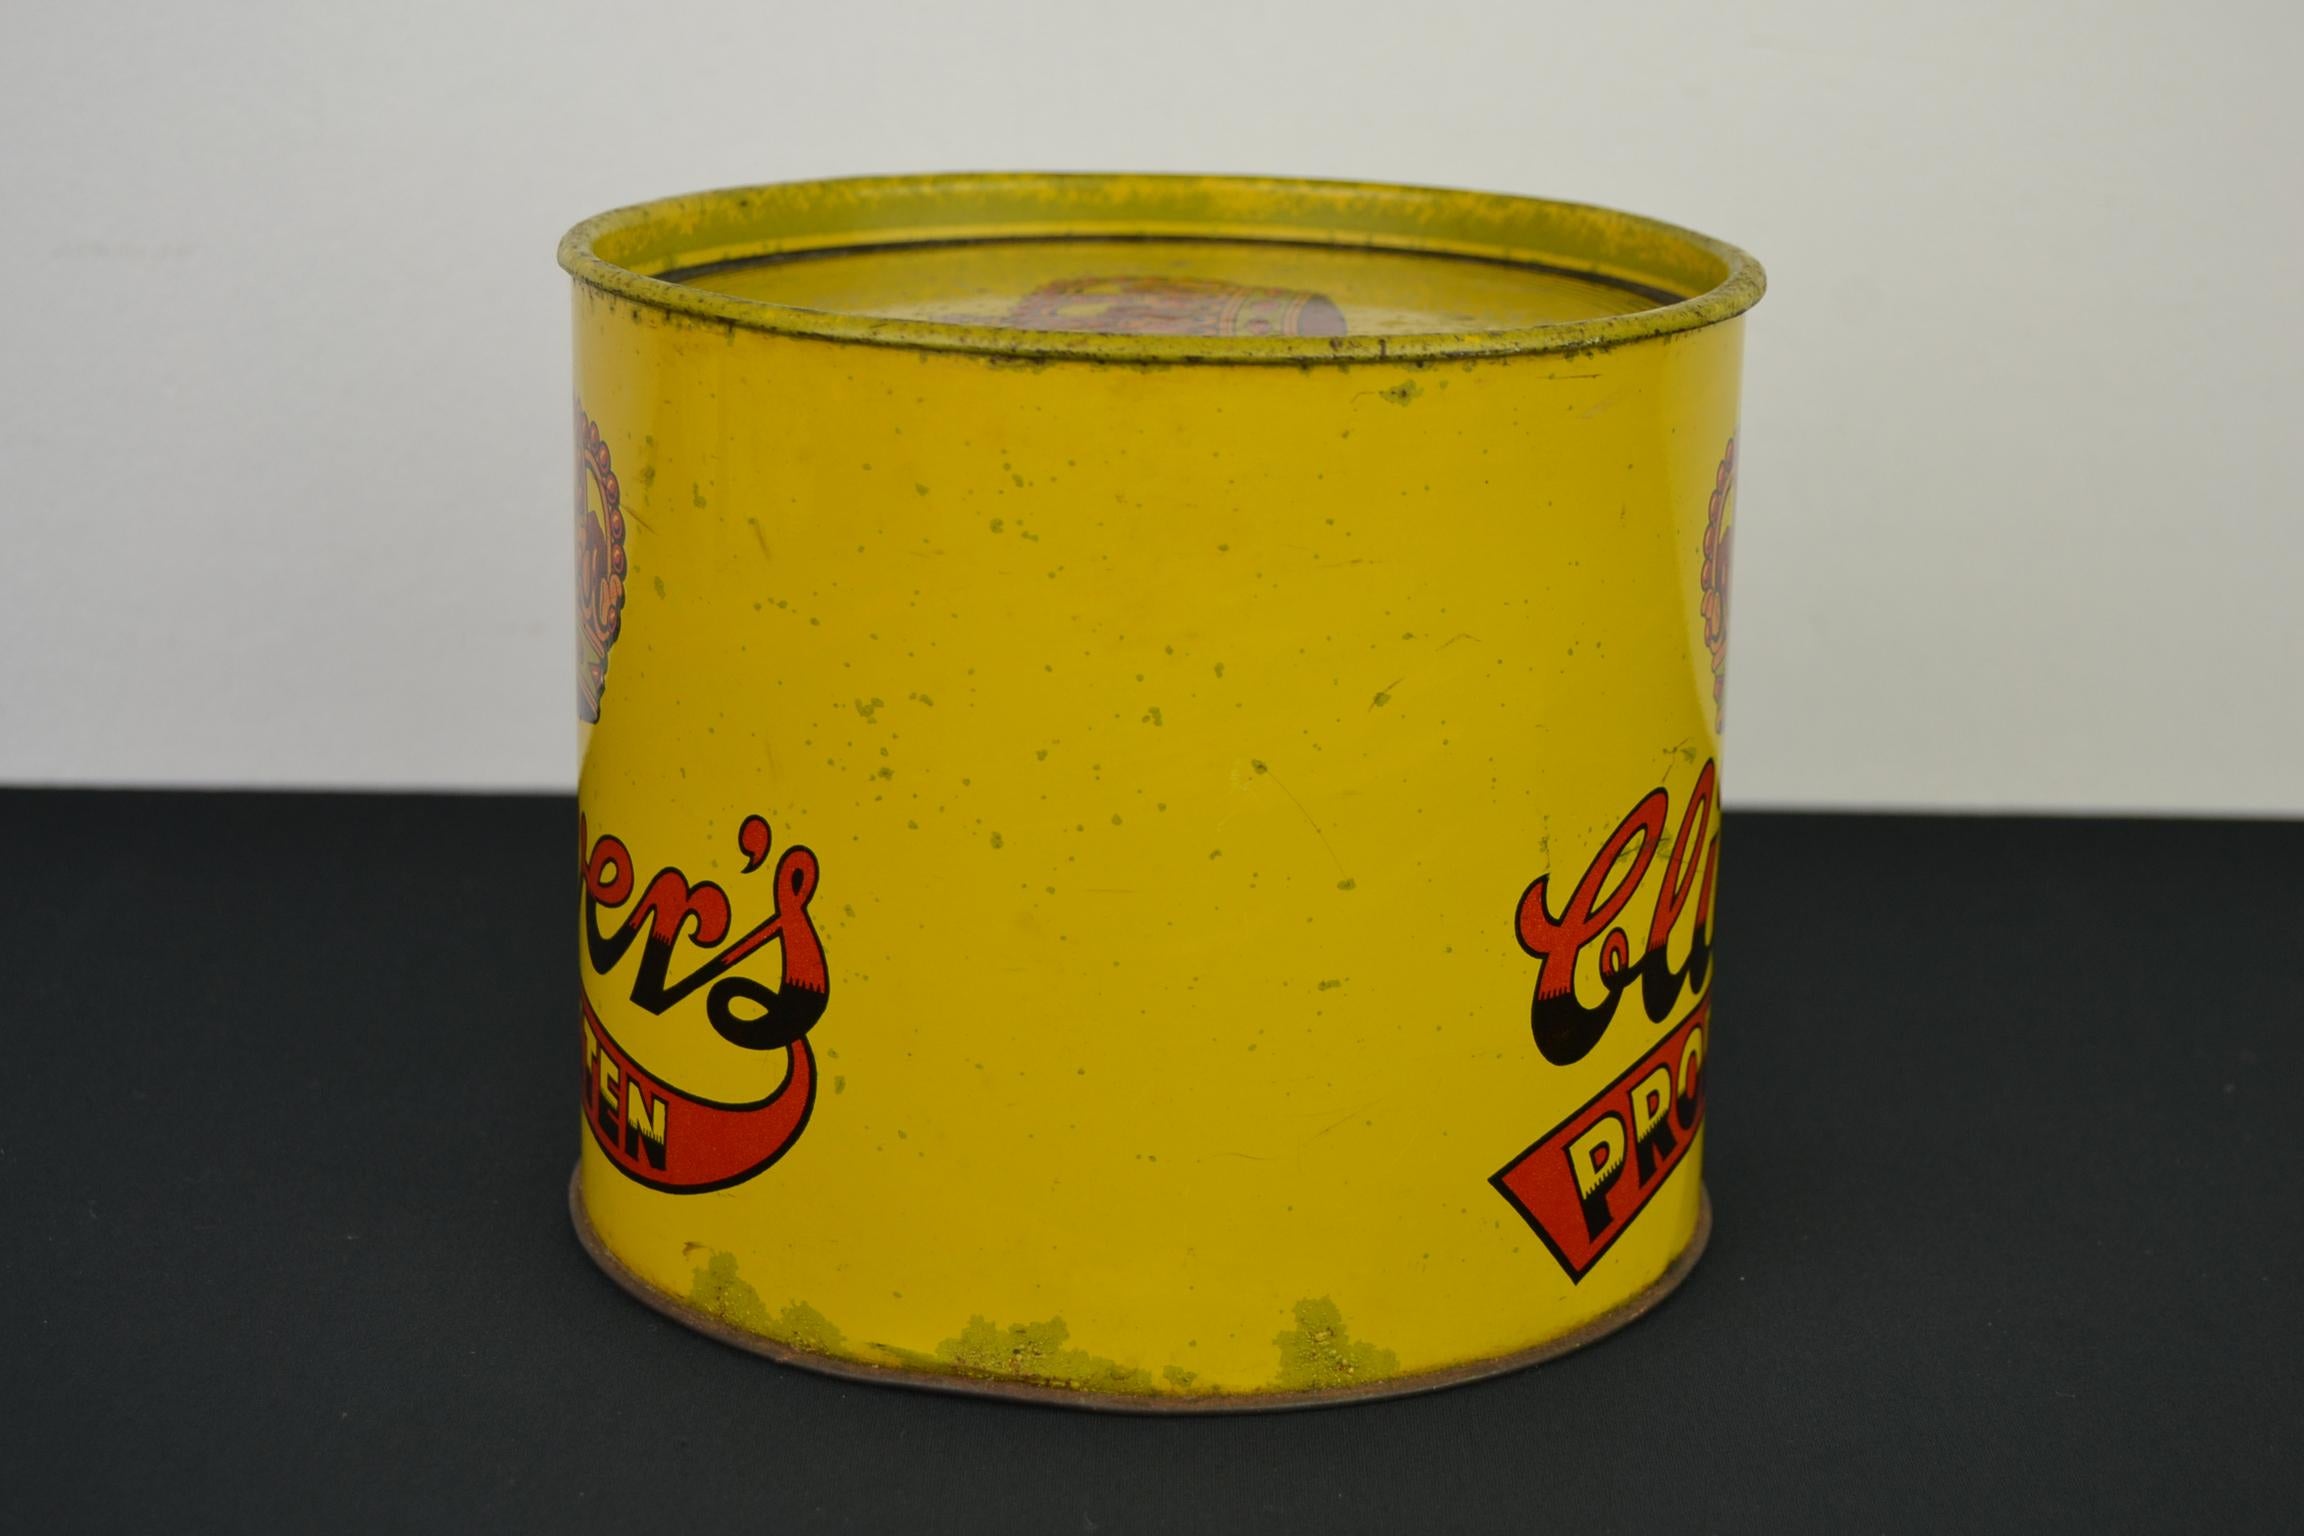 Mid-Century Modern Vintage Royal Toffee Tin, 1960s, The Netherlands For Sale